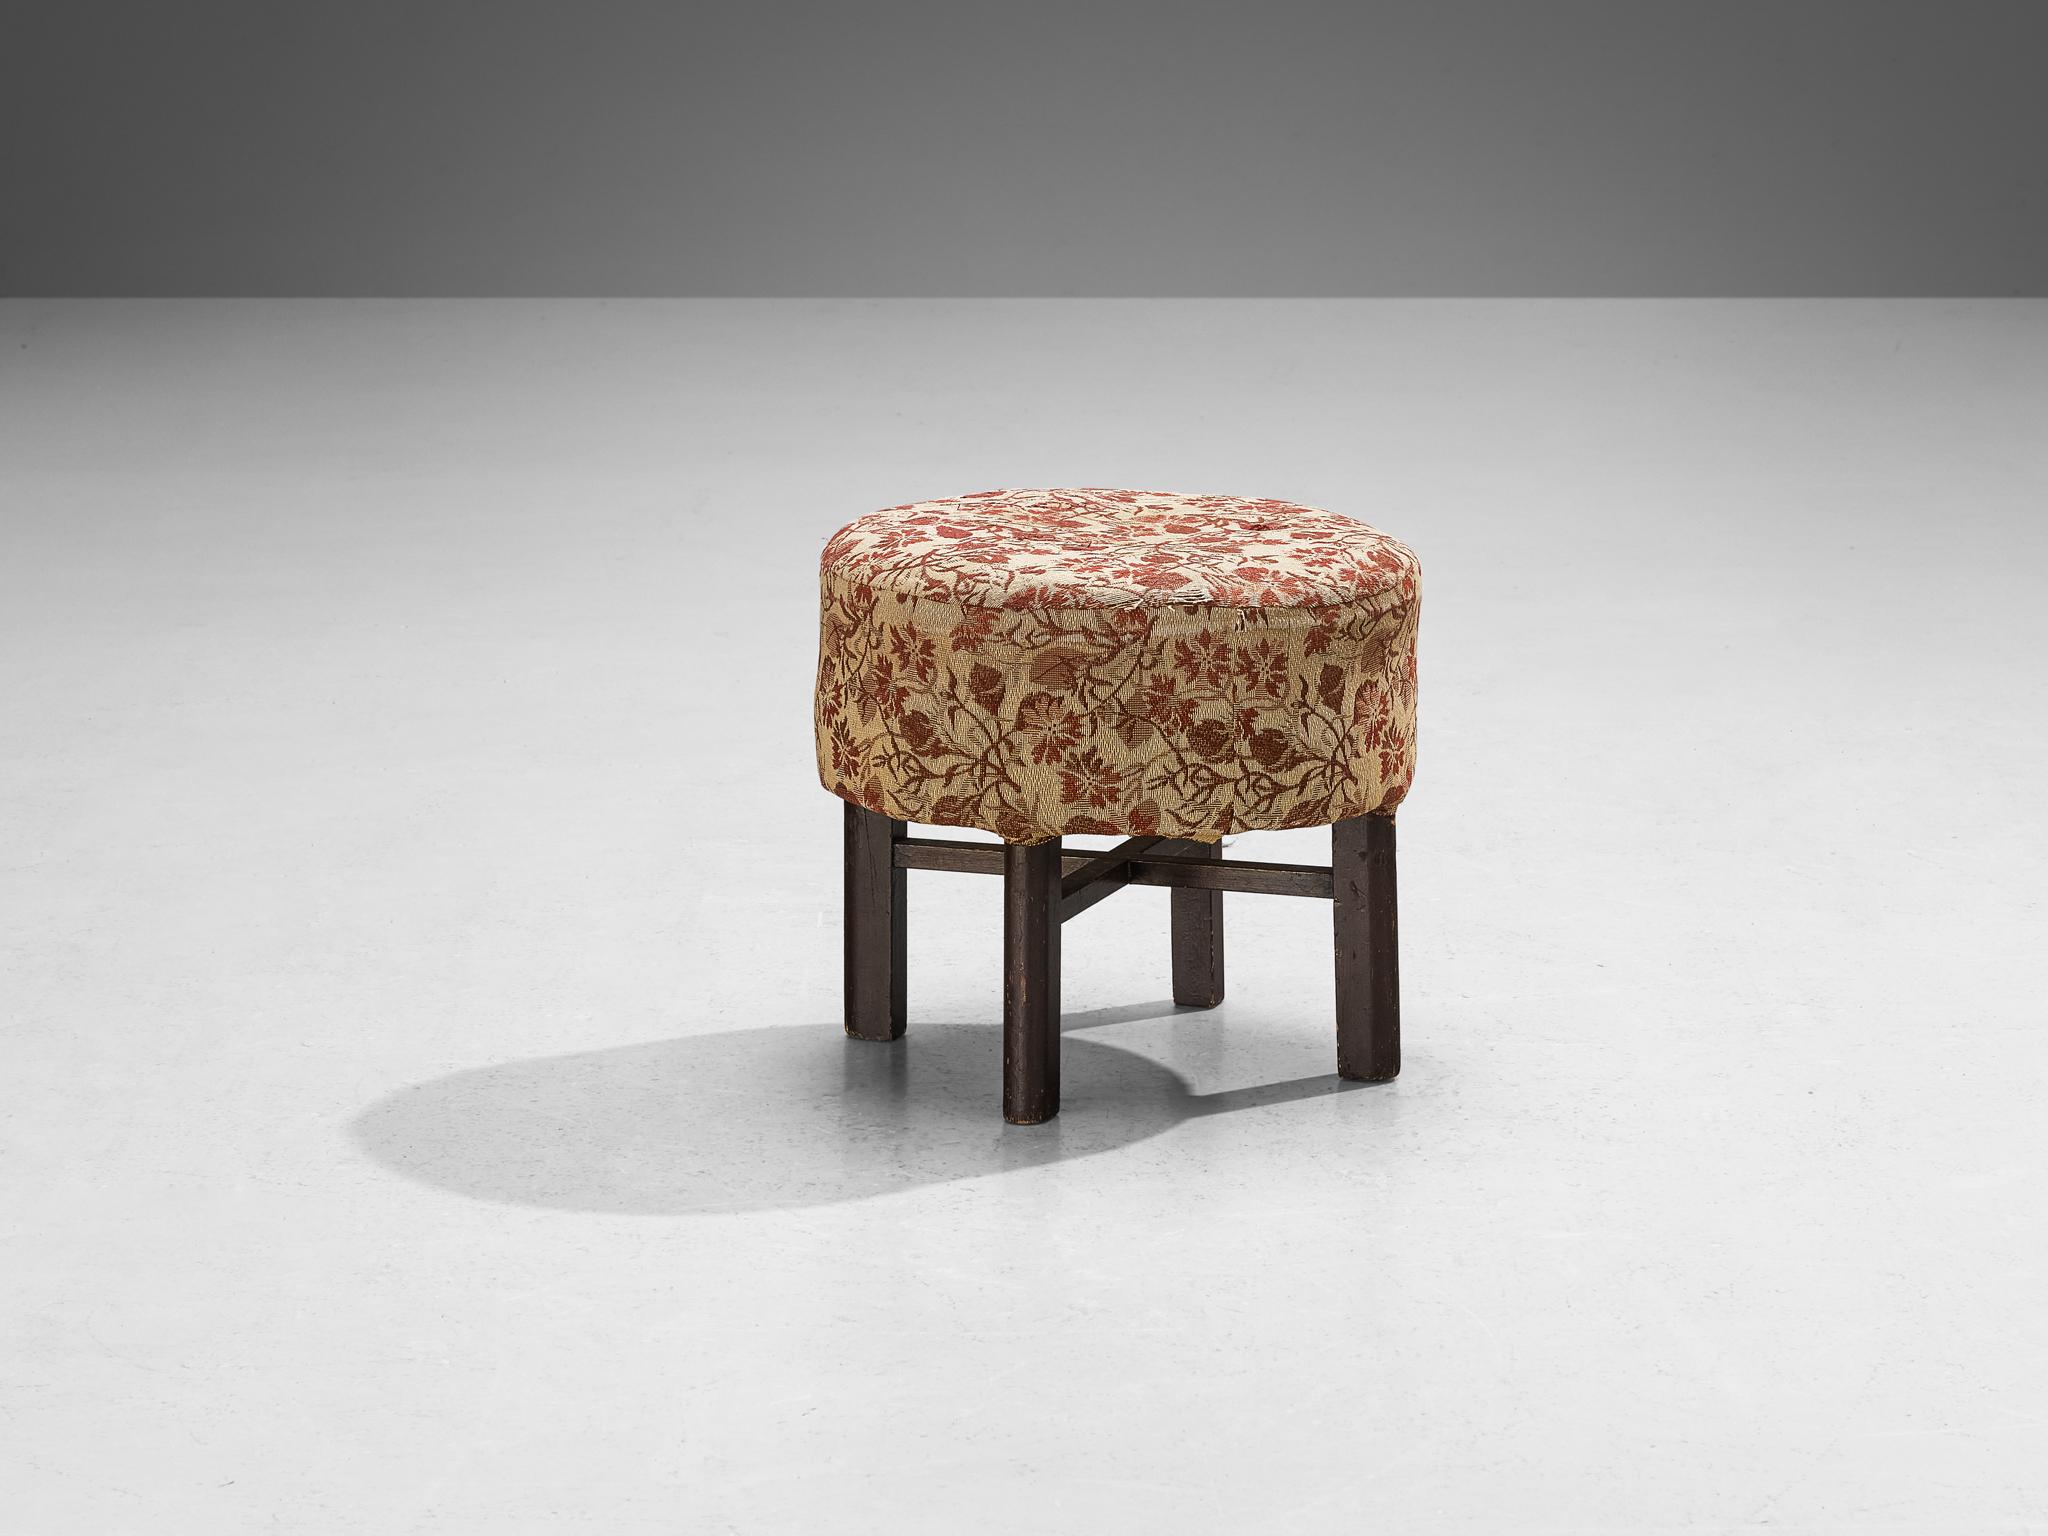 Jindrich Halabala for UP Závody, footstool, tabouret, ottoman, fabric, stained wood, Czech Republic, 1930s.

This poetic pouf is designed in the 1930s when the Art Deco Period was at its highest point and distinguishes itself by means of artistic